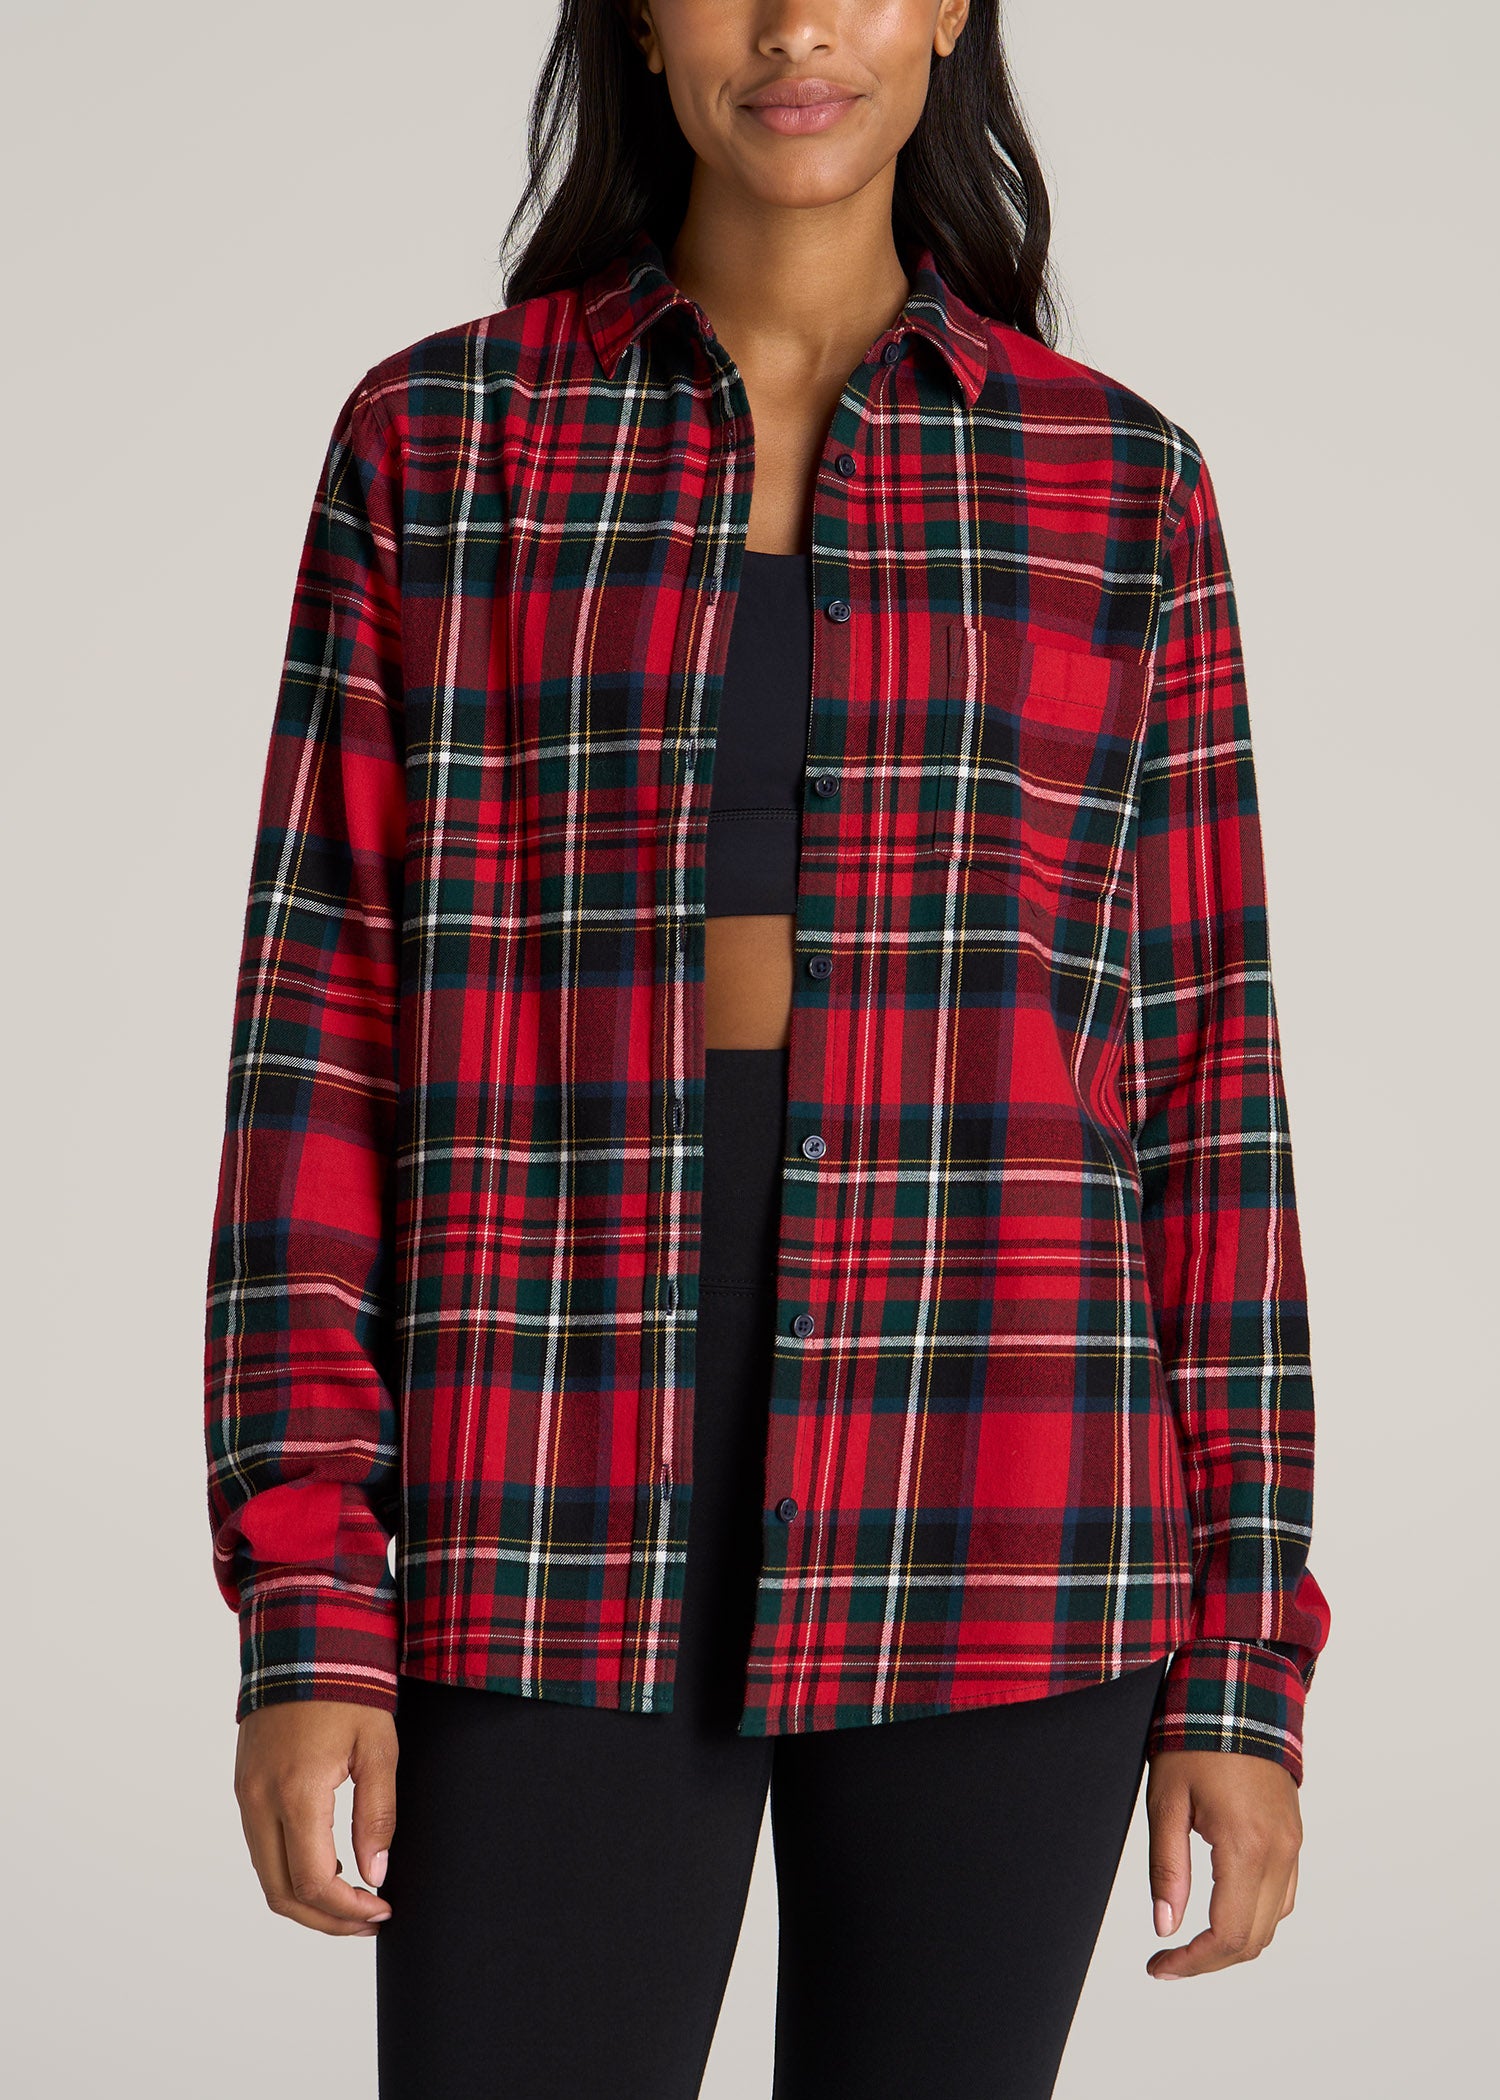 Flannel Button-Up Shirt for Tall Women | American Tall